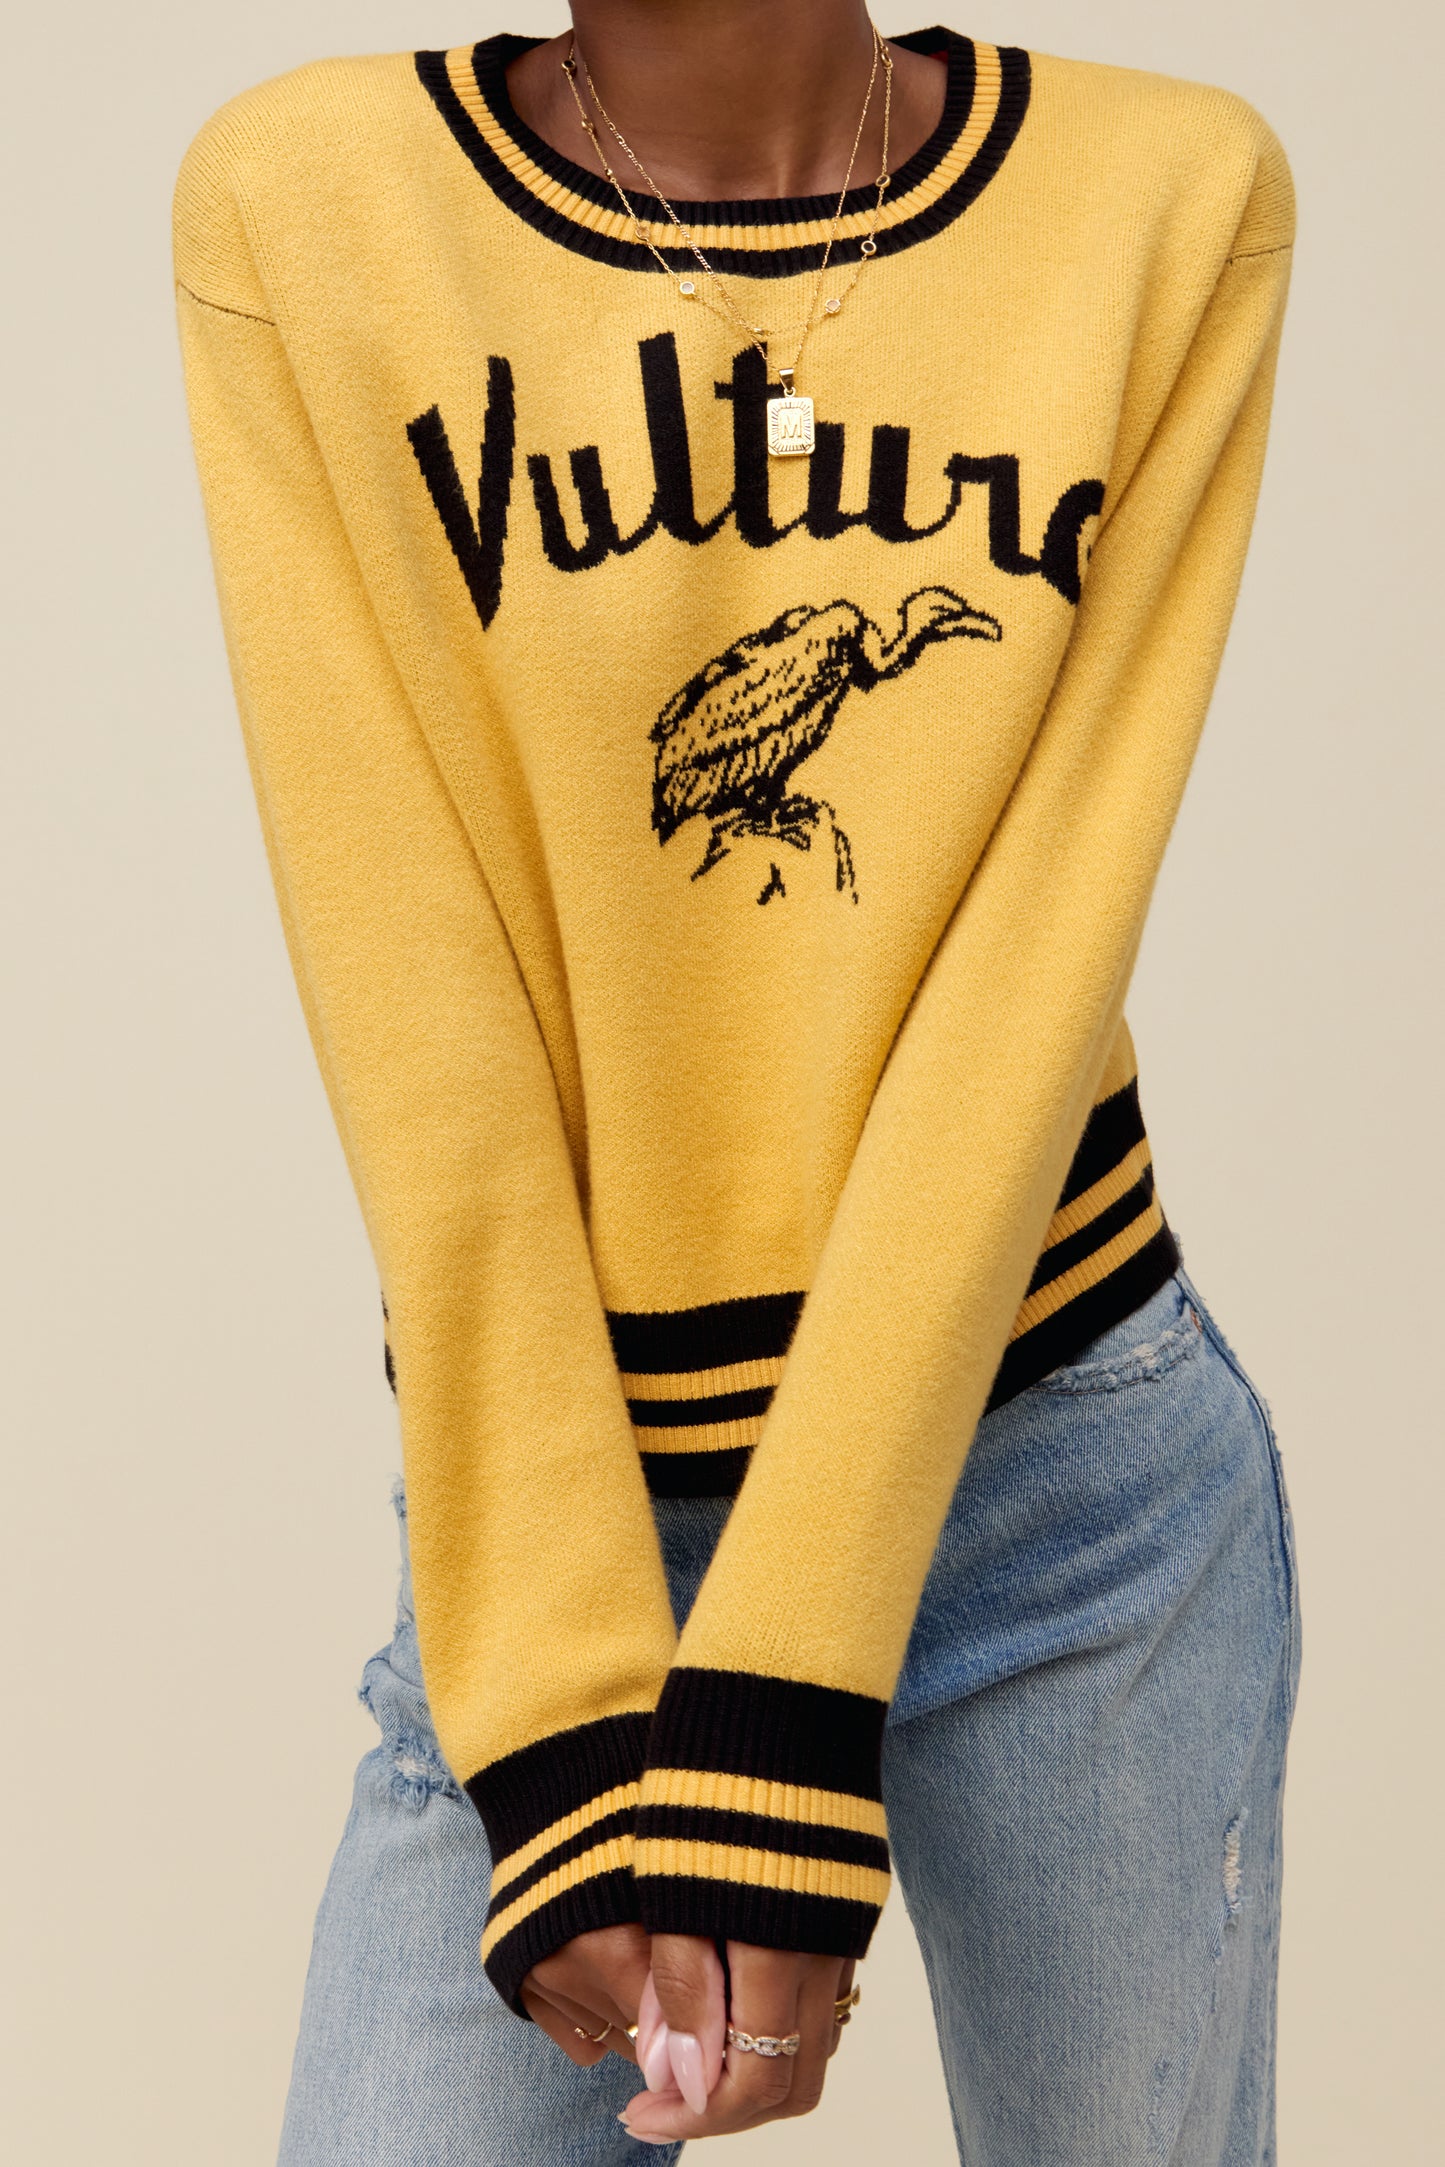 Blondie Vultures Knit Pullover in Gold